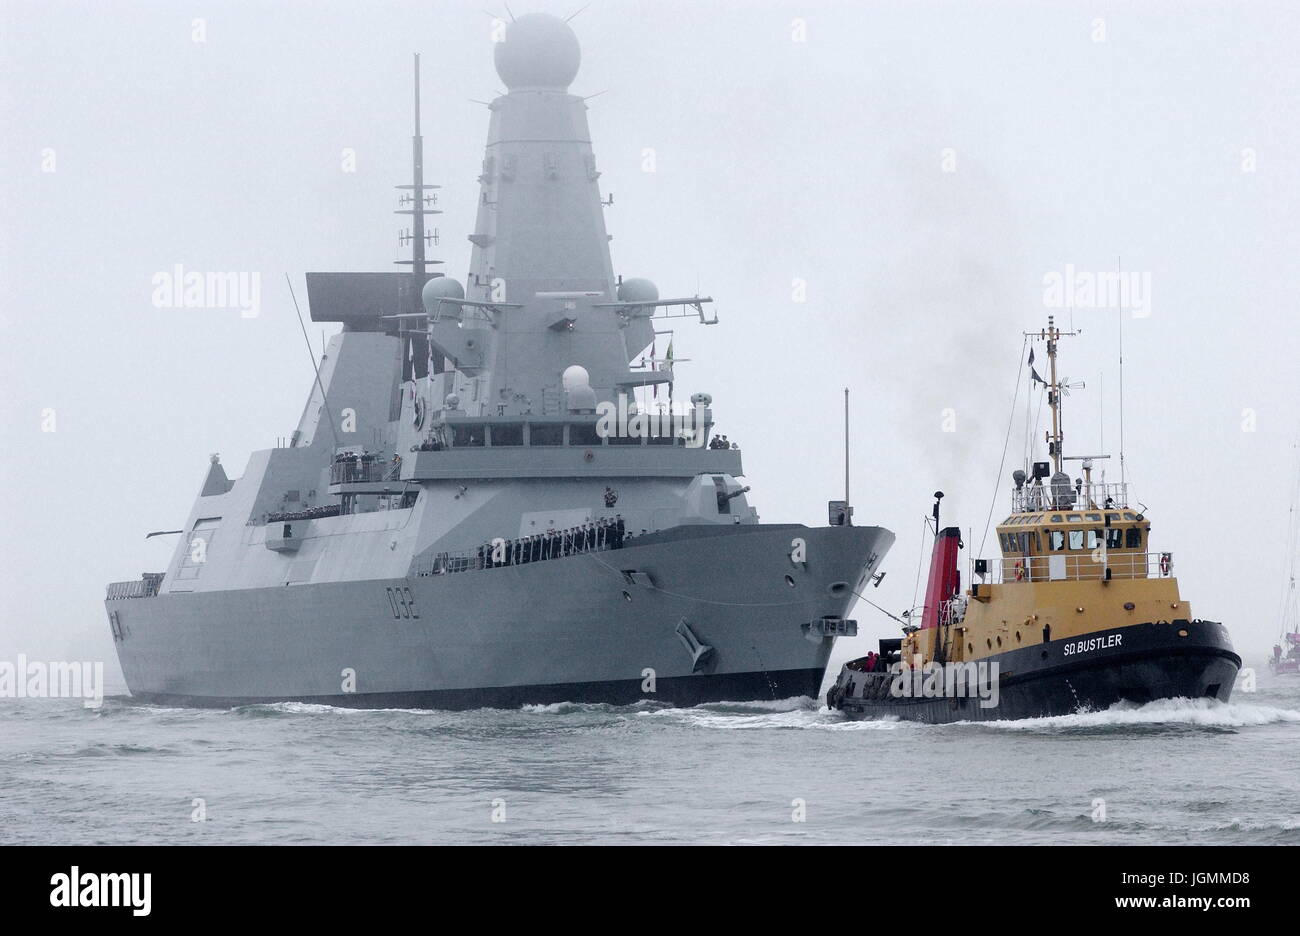 AJAXNETPHOTO. 28TH JANUARY, 2009. PORTSMOUTH,ENGLAND. - STEALTHY ARRIVAL - HMS DARING, FIRST OF THE ROYAL NAVY'S  SIX NEW TYPE 45 DESTROYERS, ARRIVES AT PORTSMOUTH NAVAL BASE; TOWED BY SD BUSTLER. PHOTO:JONATHAN EASTLAND/AJAX REF:D92801 2256 Stock Photo